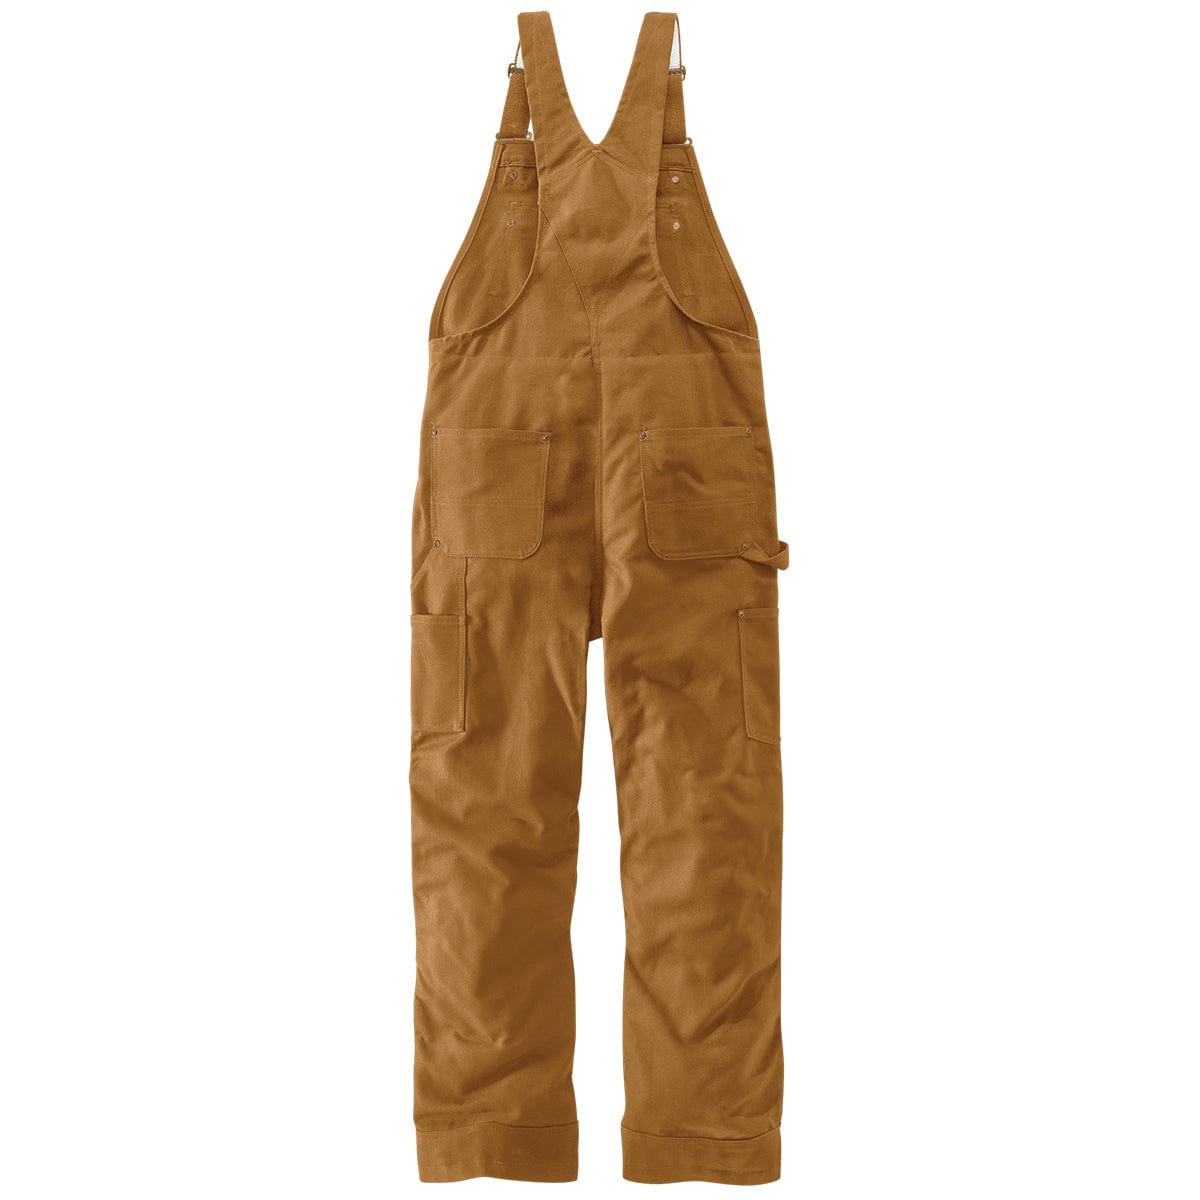 Carhartt Loose Fit Firm Duck Insulated Bib Overall